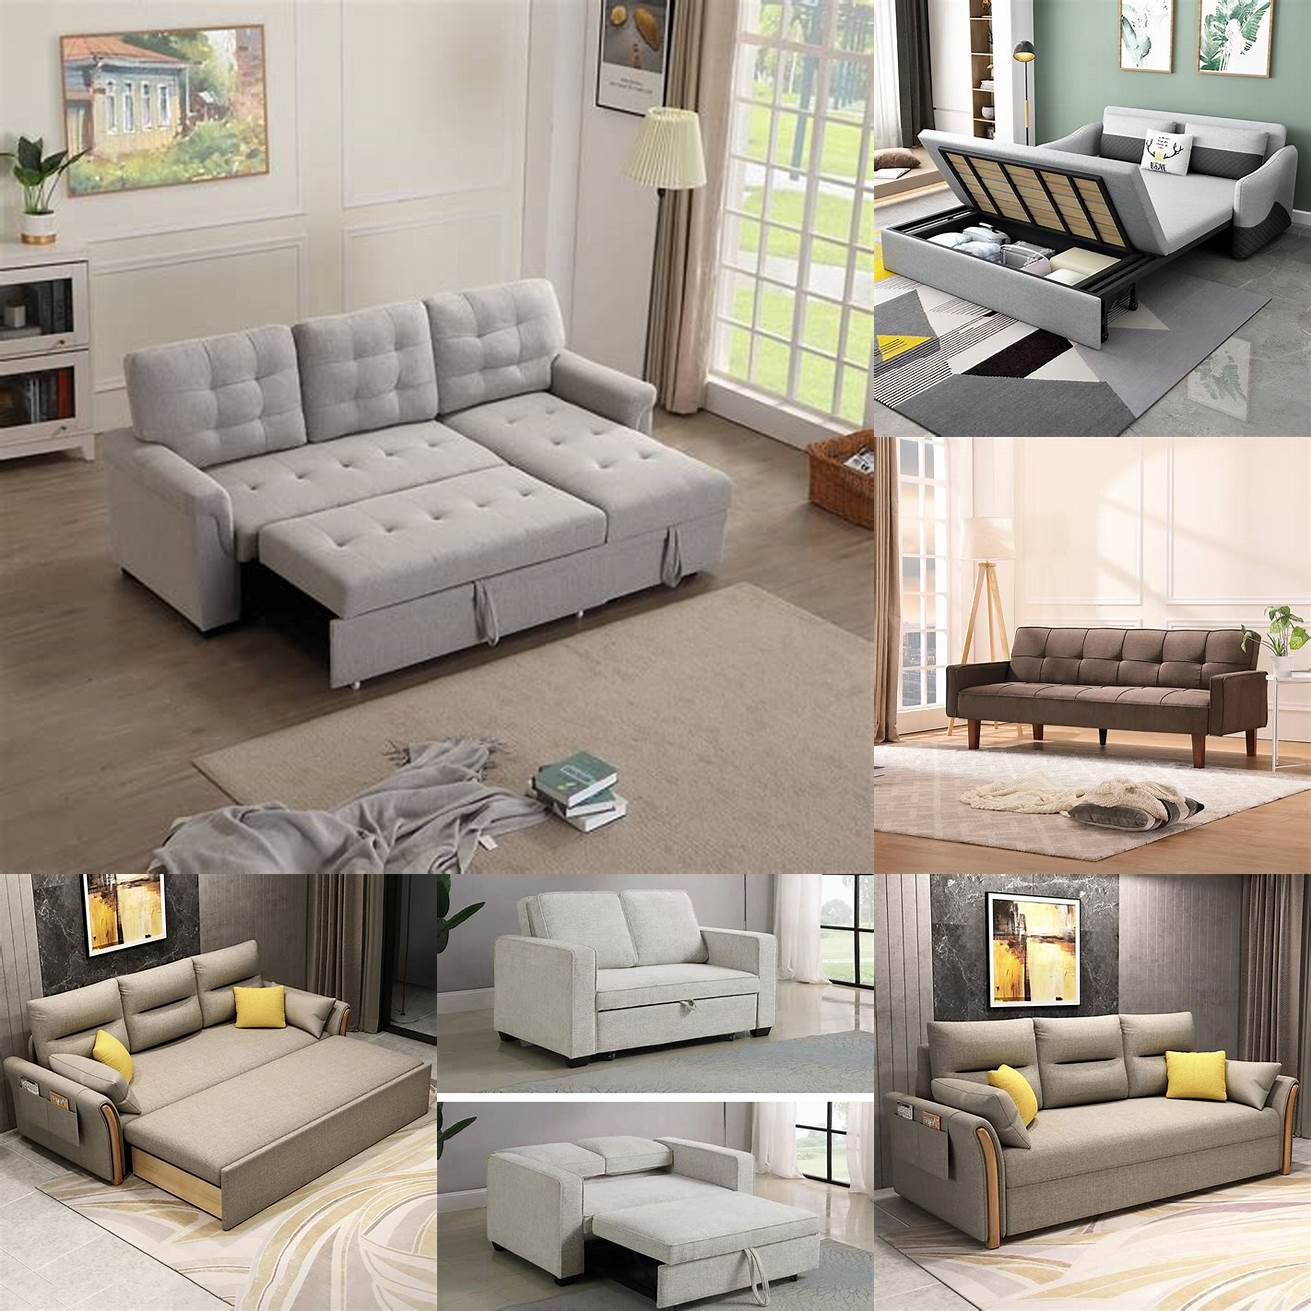 A white Full Sleeper Sofa is a great option for a modern living room